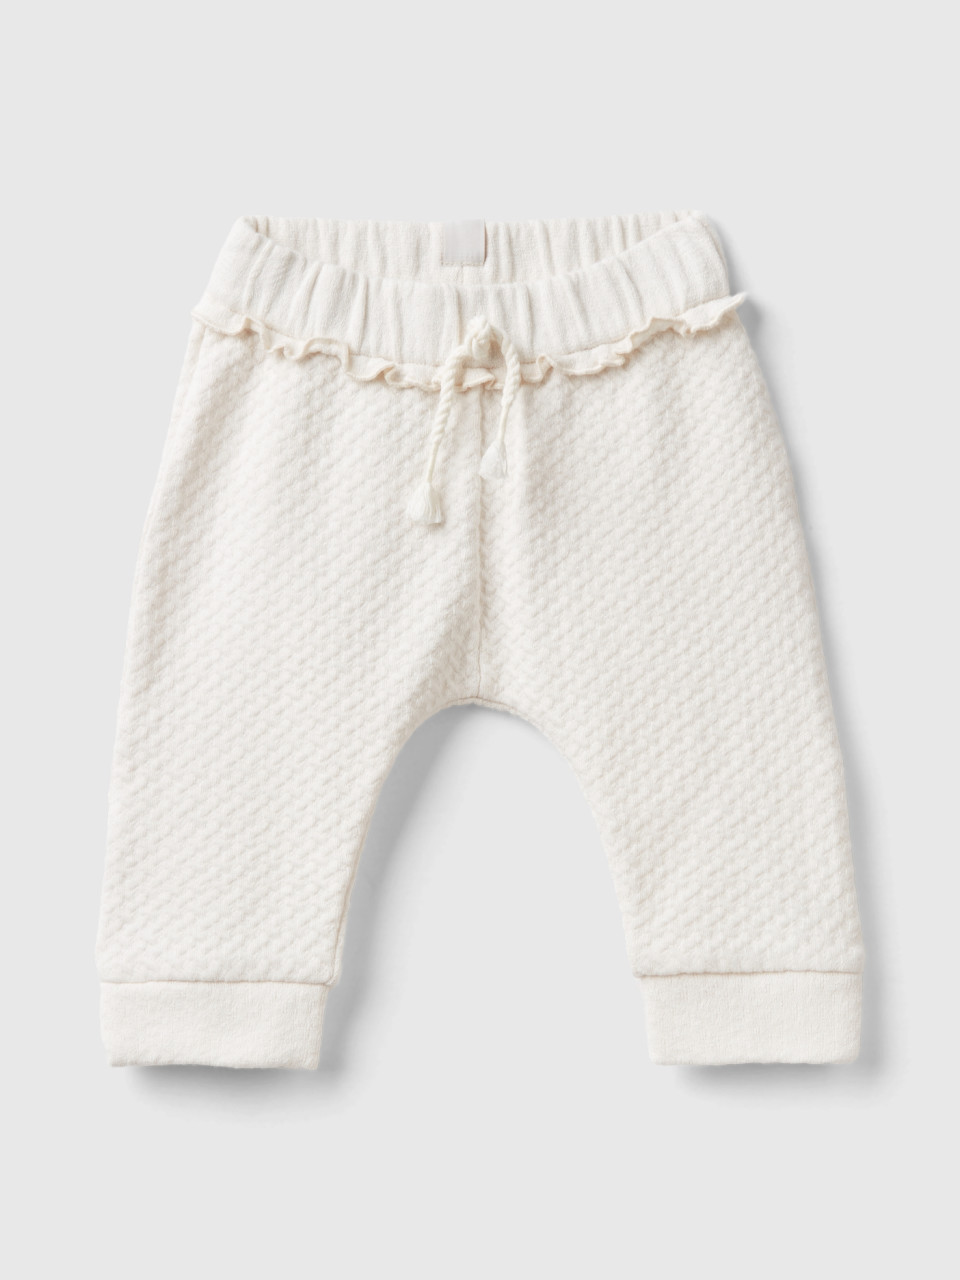 Benetton, Jacquard Trousers With Slits, Creamy White, Kids